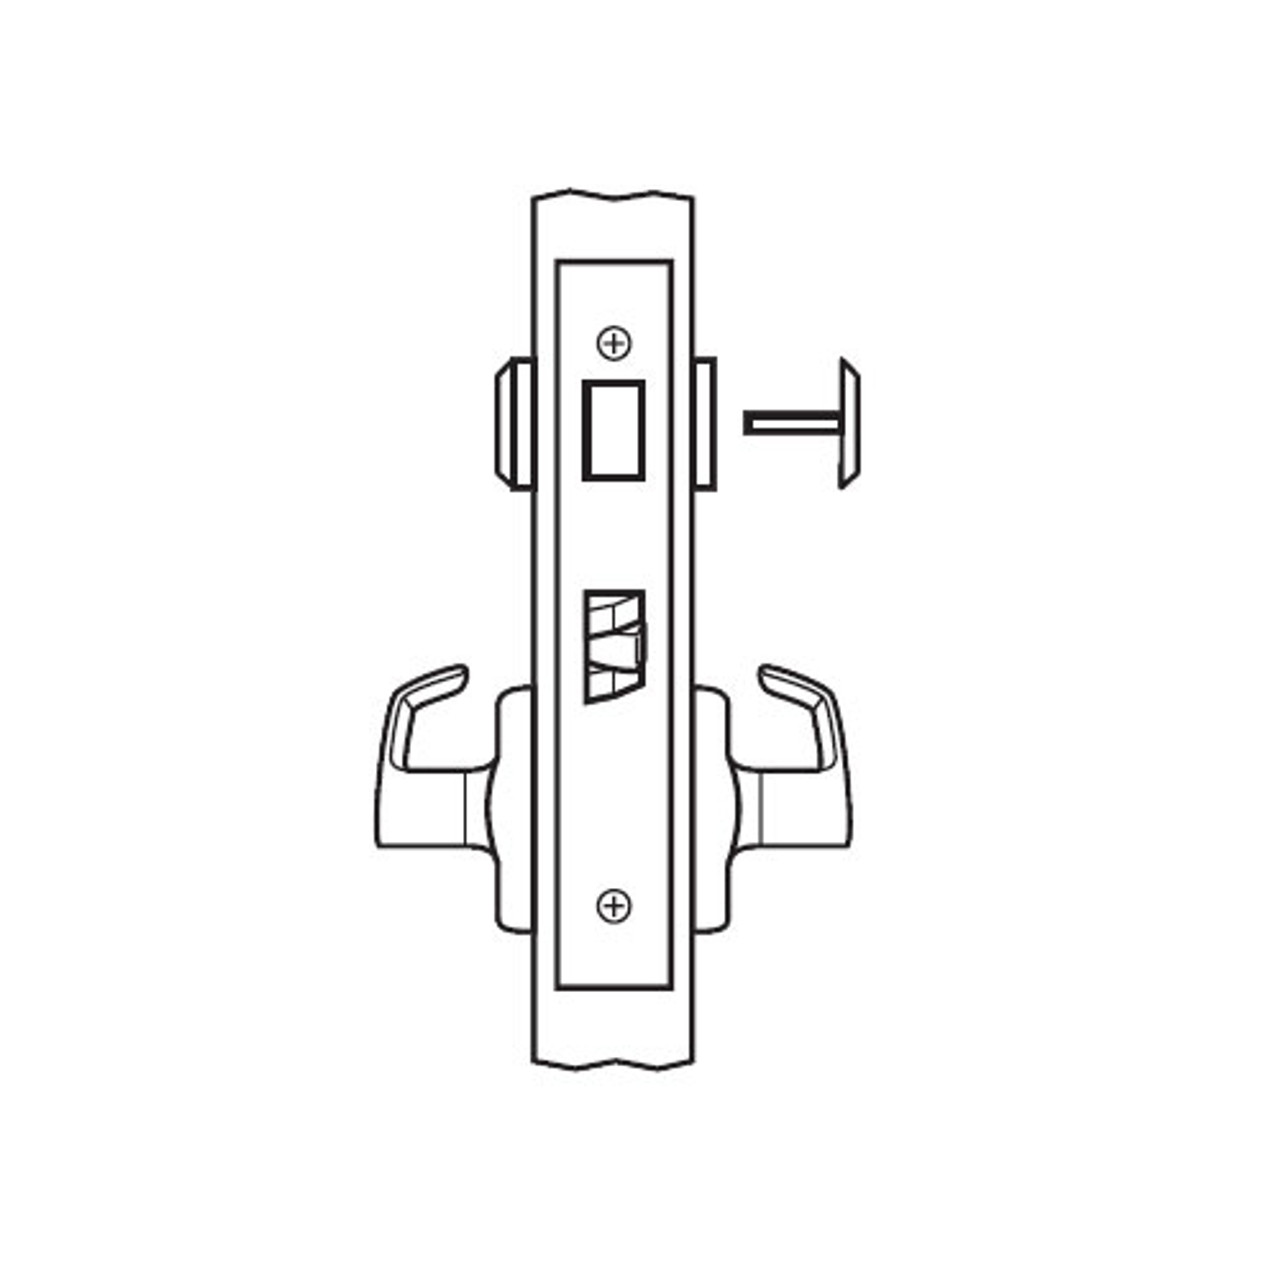 BM02-BRG-10B Arrow Mortise Lock BM Series Privacy Lever with Broadway Design and G Escutcheon in Oil Rubbed Bronze